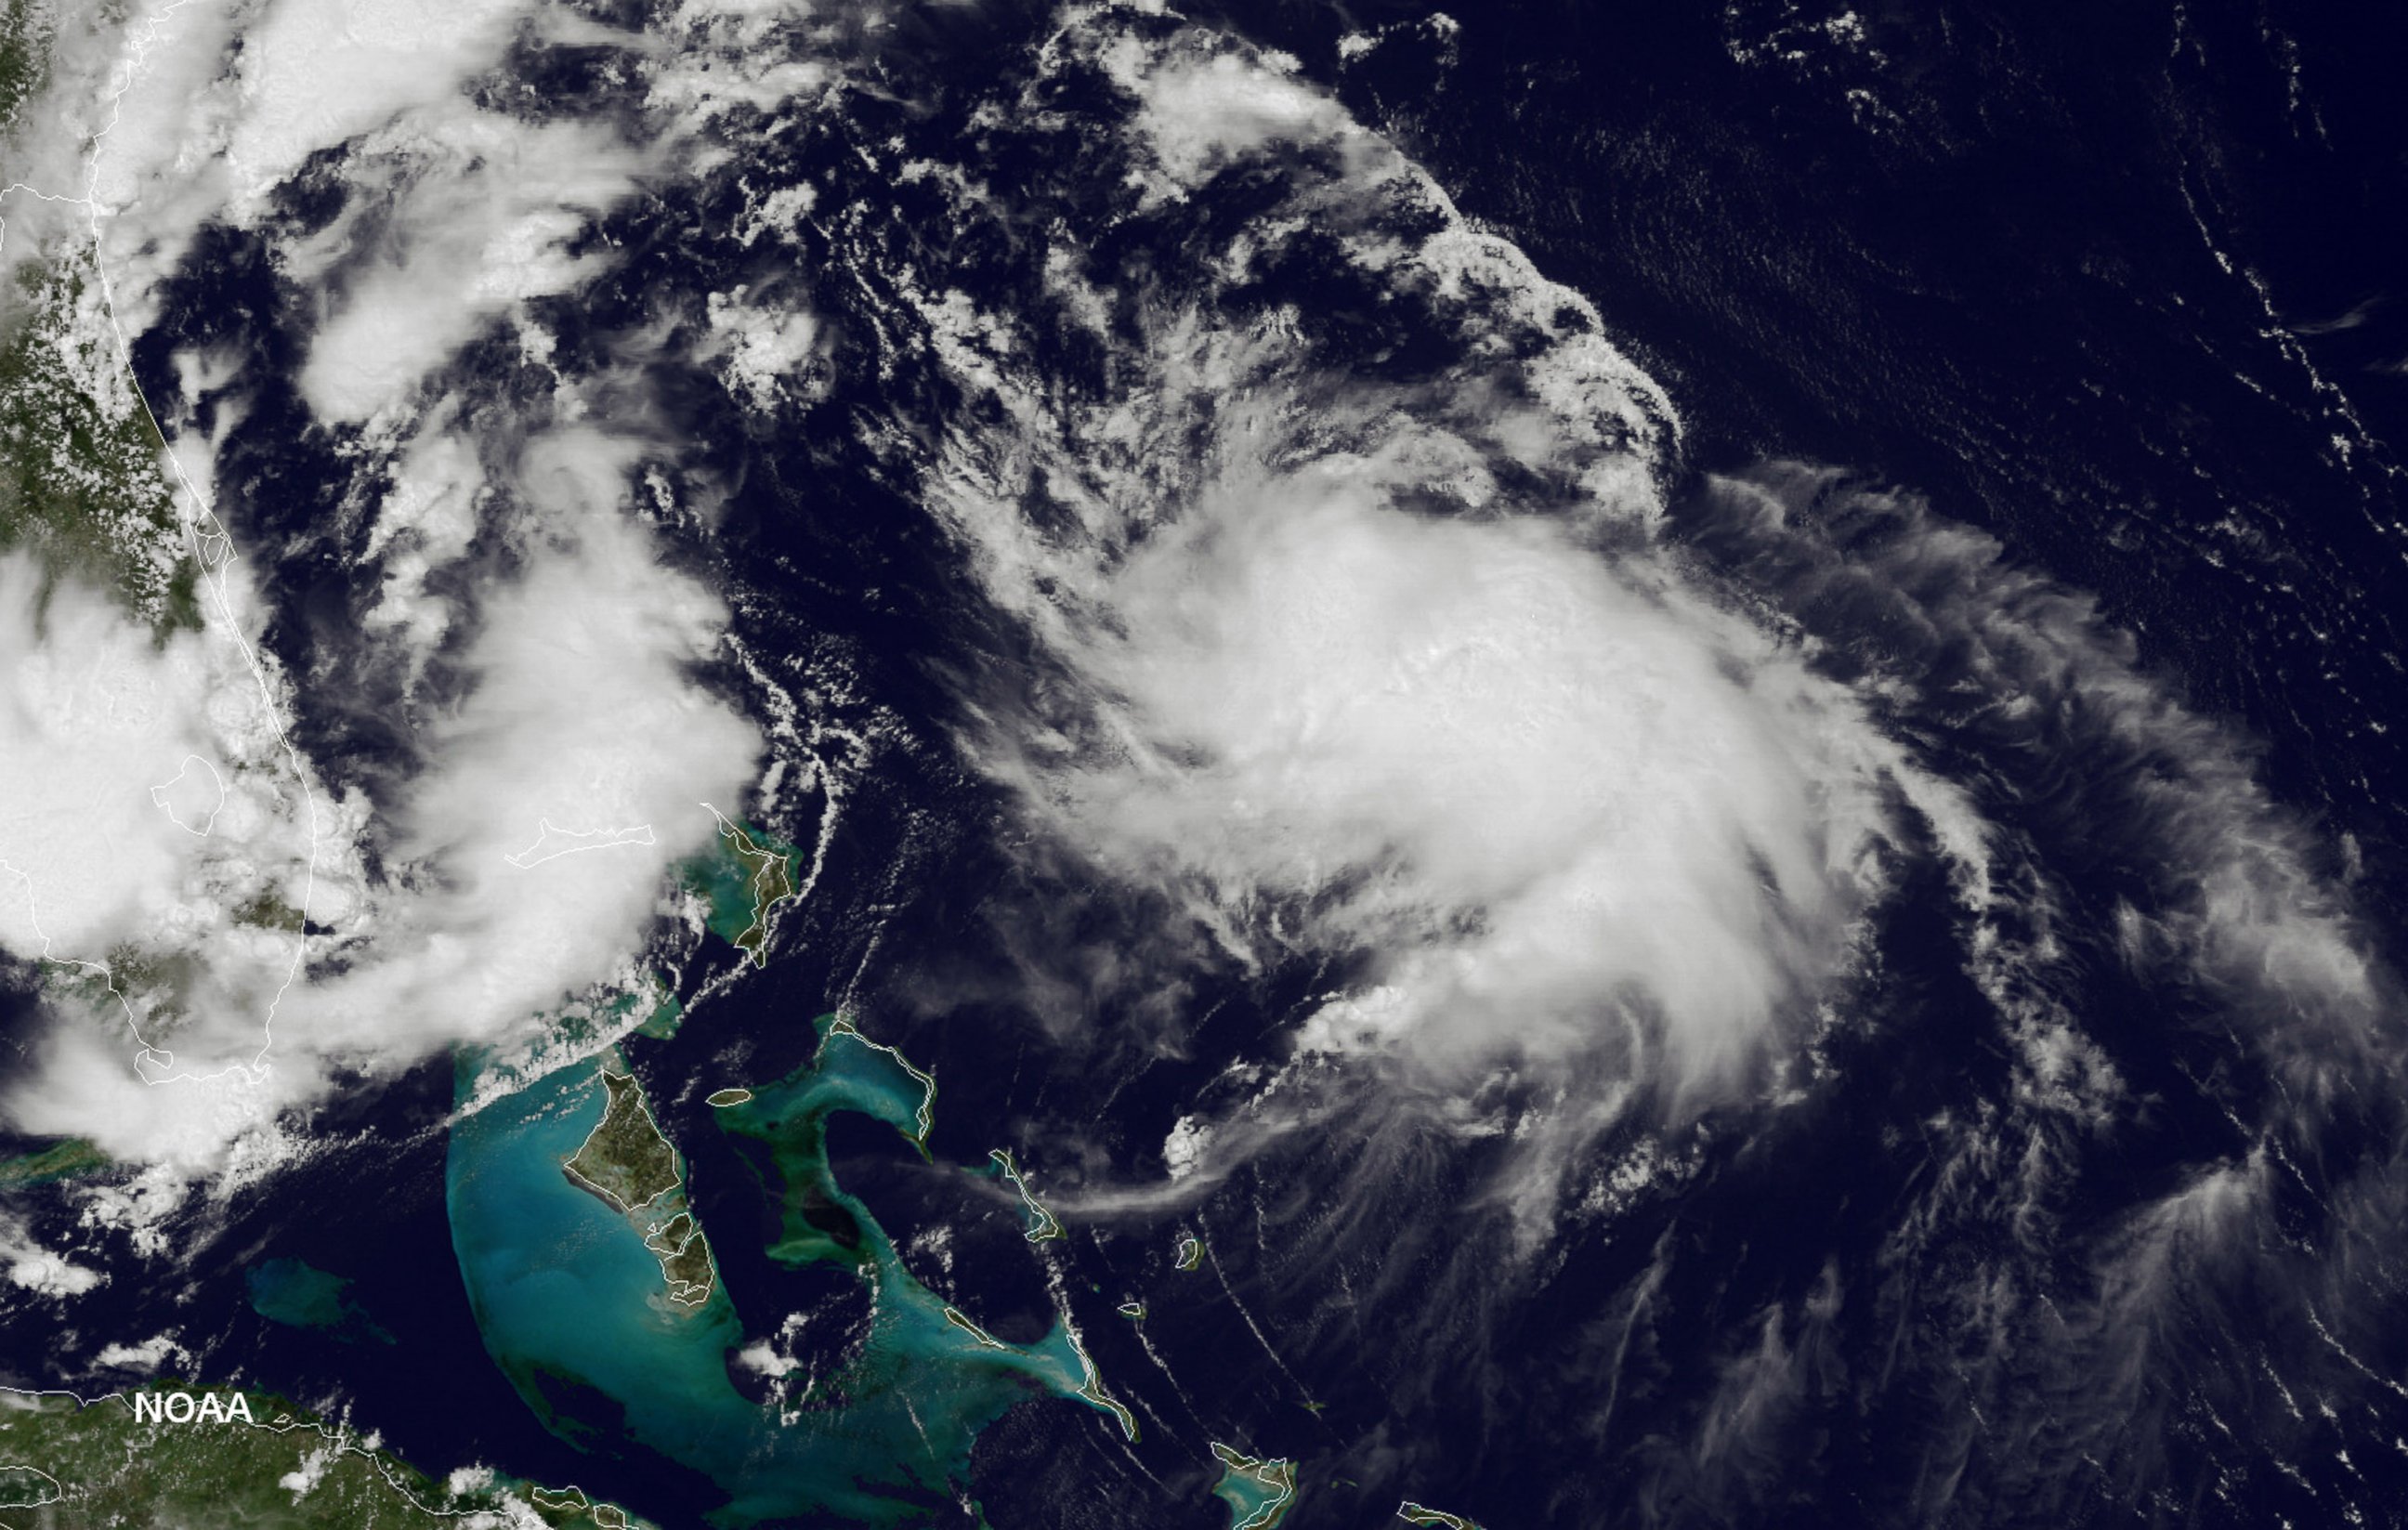 PHOTO: In this handout provided by the National Oceanic and Atmospheric Administration (NOAA) from the GOES-East satellite, a weather system travels up the Atlantic coast of the United States pictured on Aug. 4, 2014. 